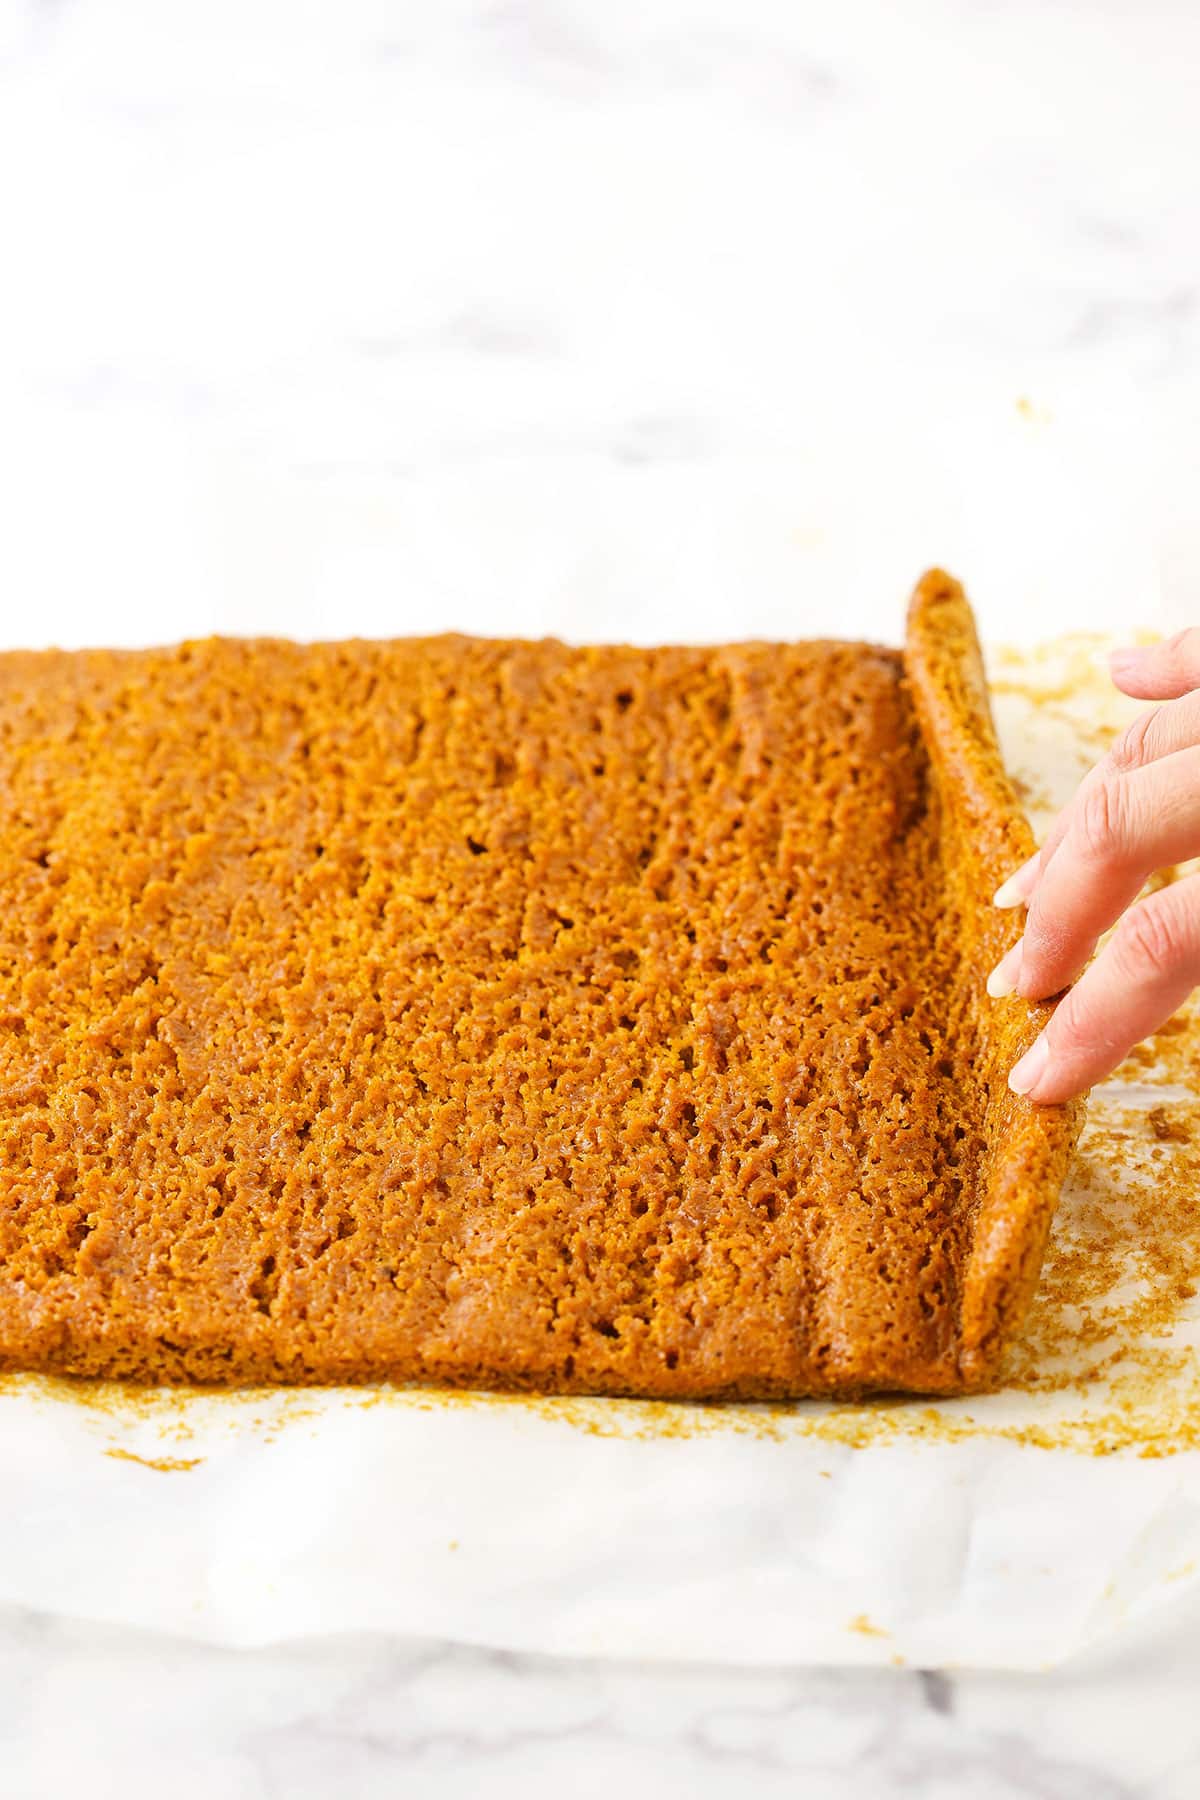 A step in making Pumpkin Roll Cake showing the unrolling of the cake and allowing it to cool before adding the filling